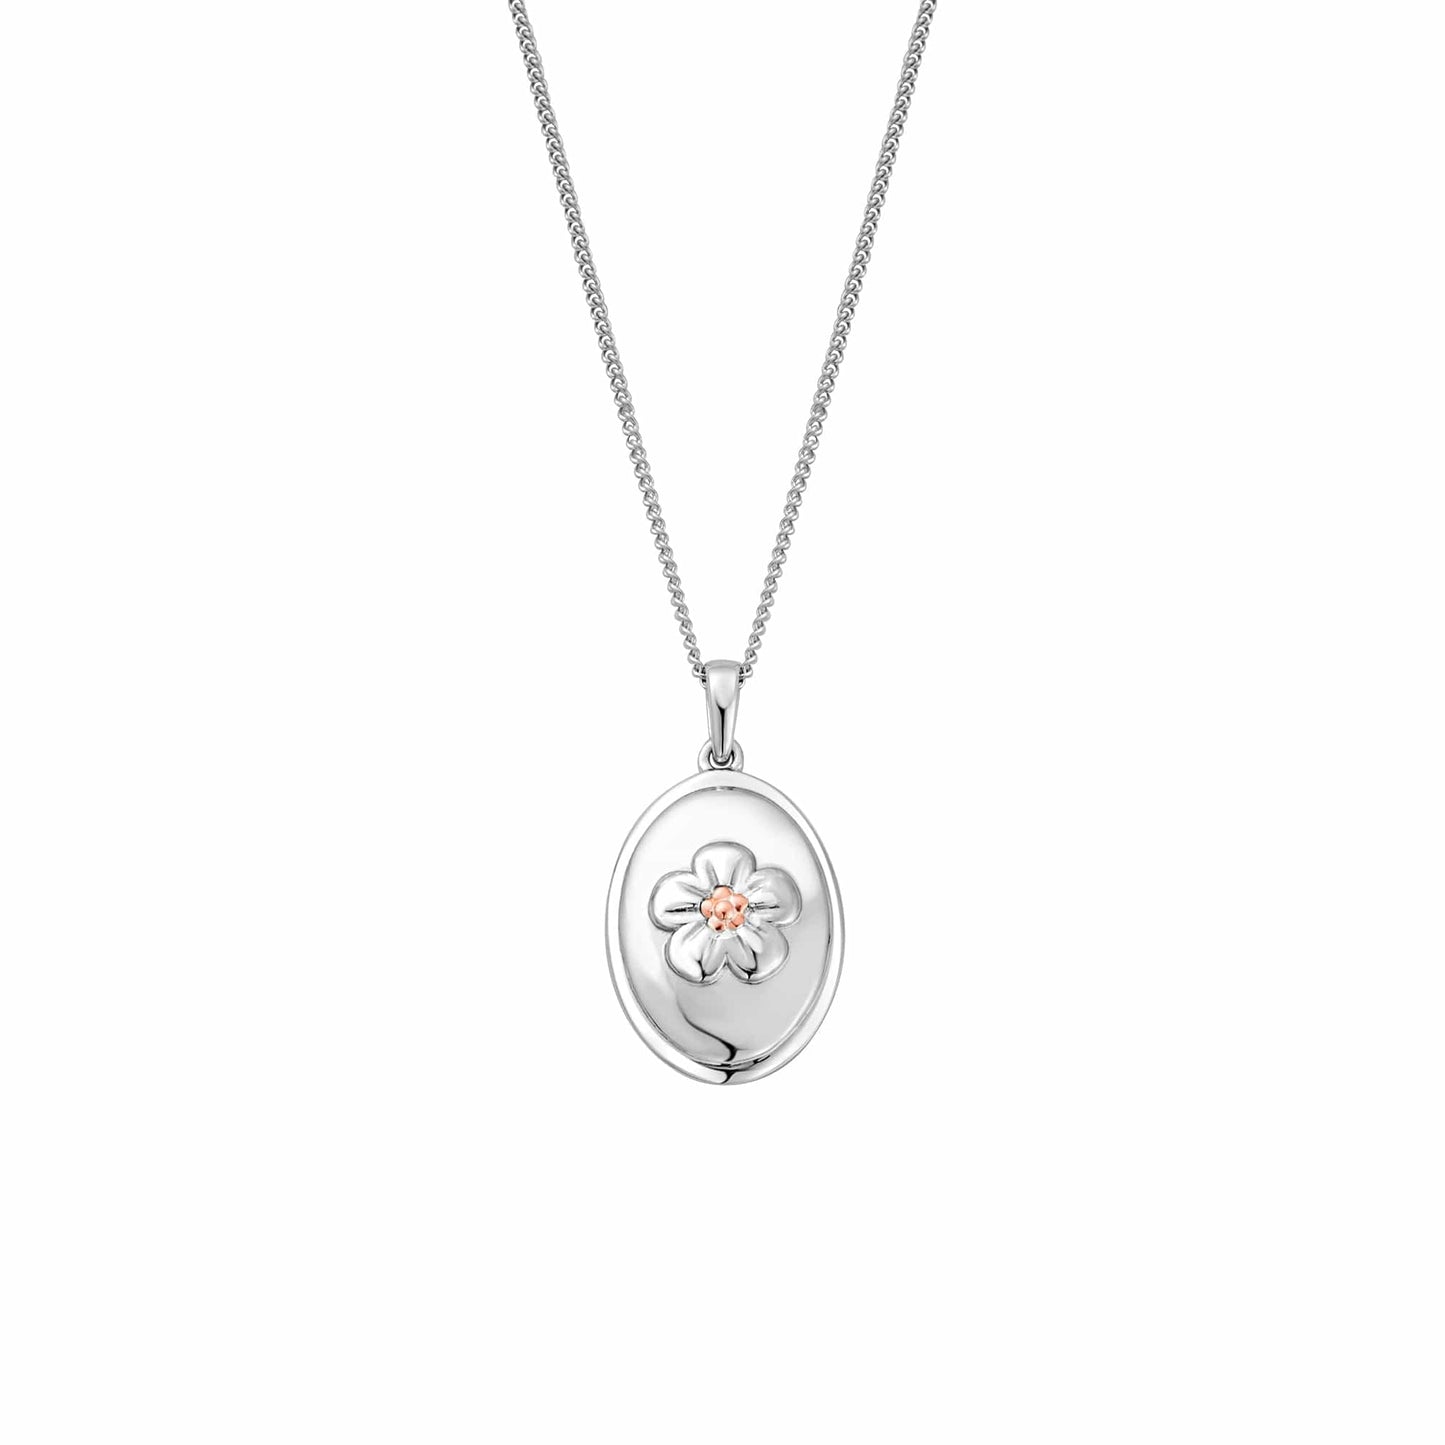 Forget Me Not Silver Pendant